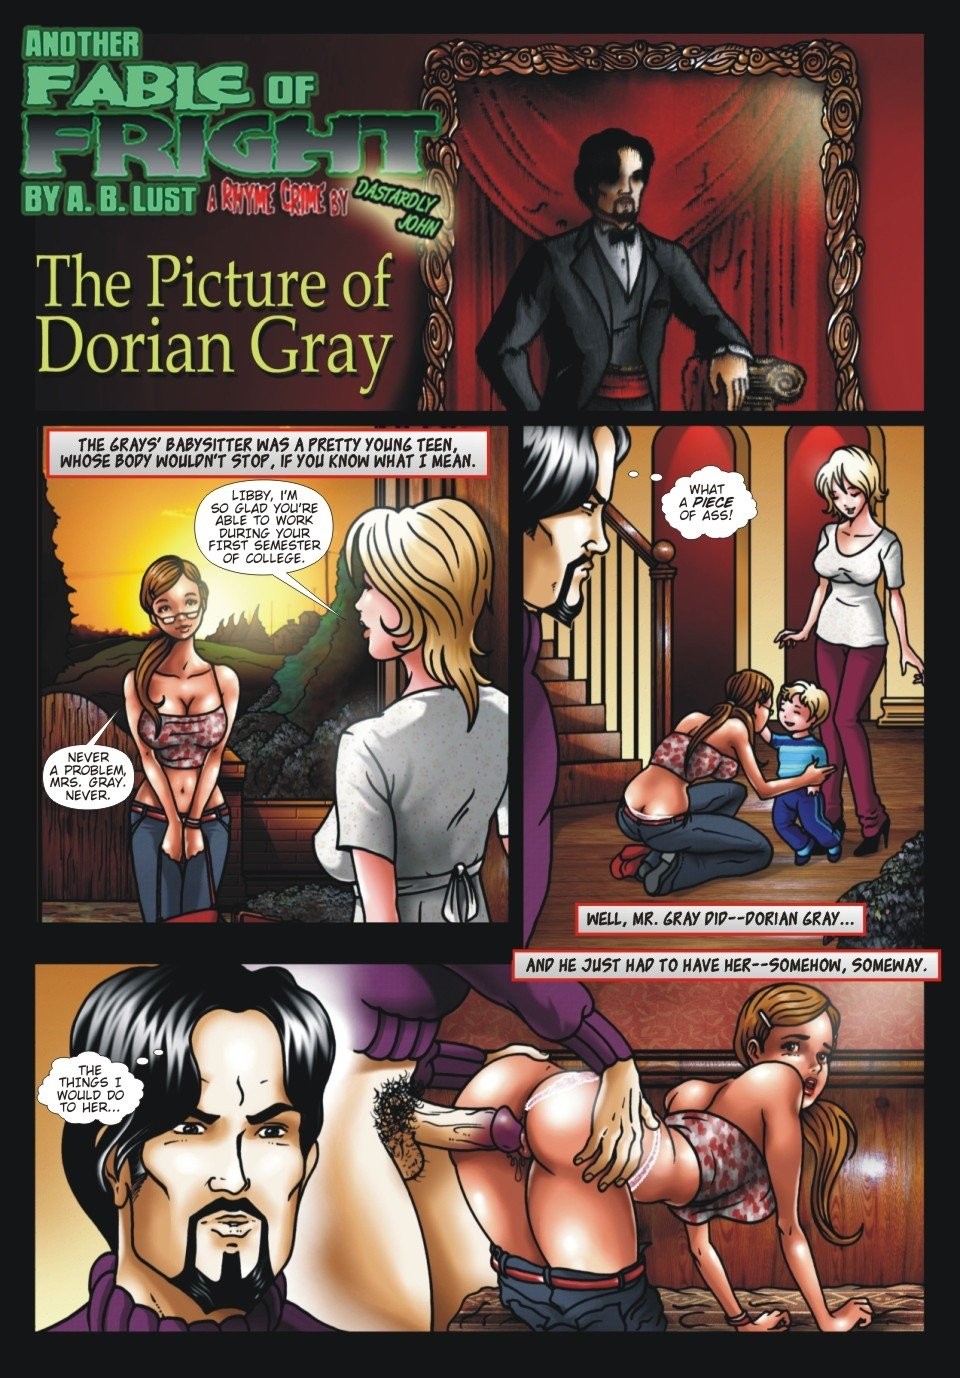 SureFap xxx porno The Picture of Dorian Gray - [HorrorBabeCentral][A.B. Lust] - Another Fable of Fright - The Picture of Dorian Gray Part 1 of 4